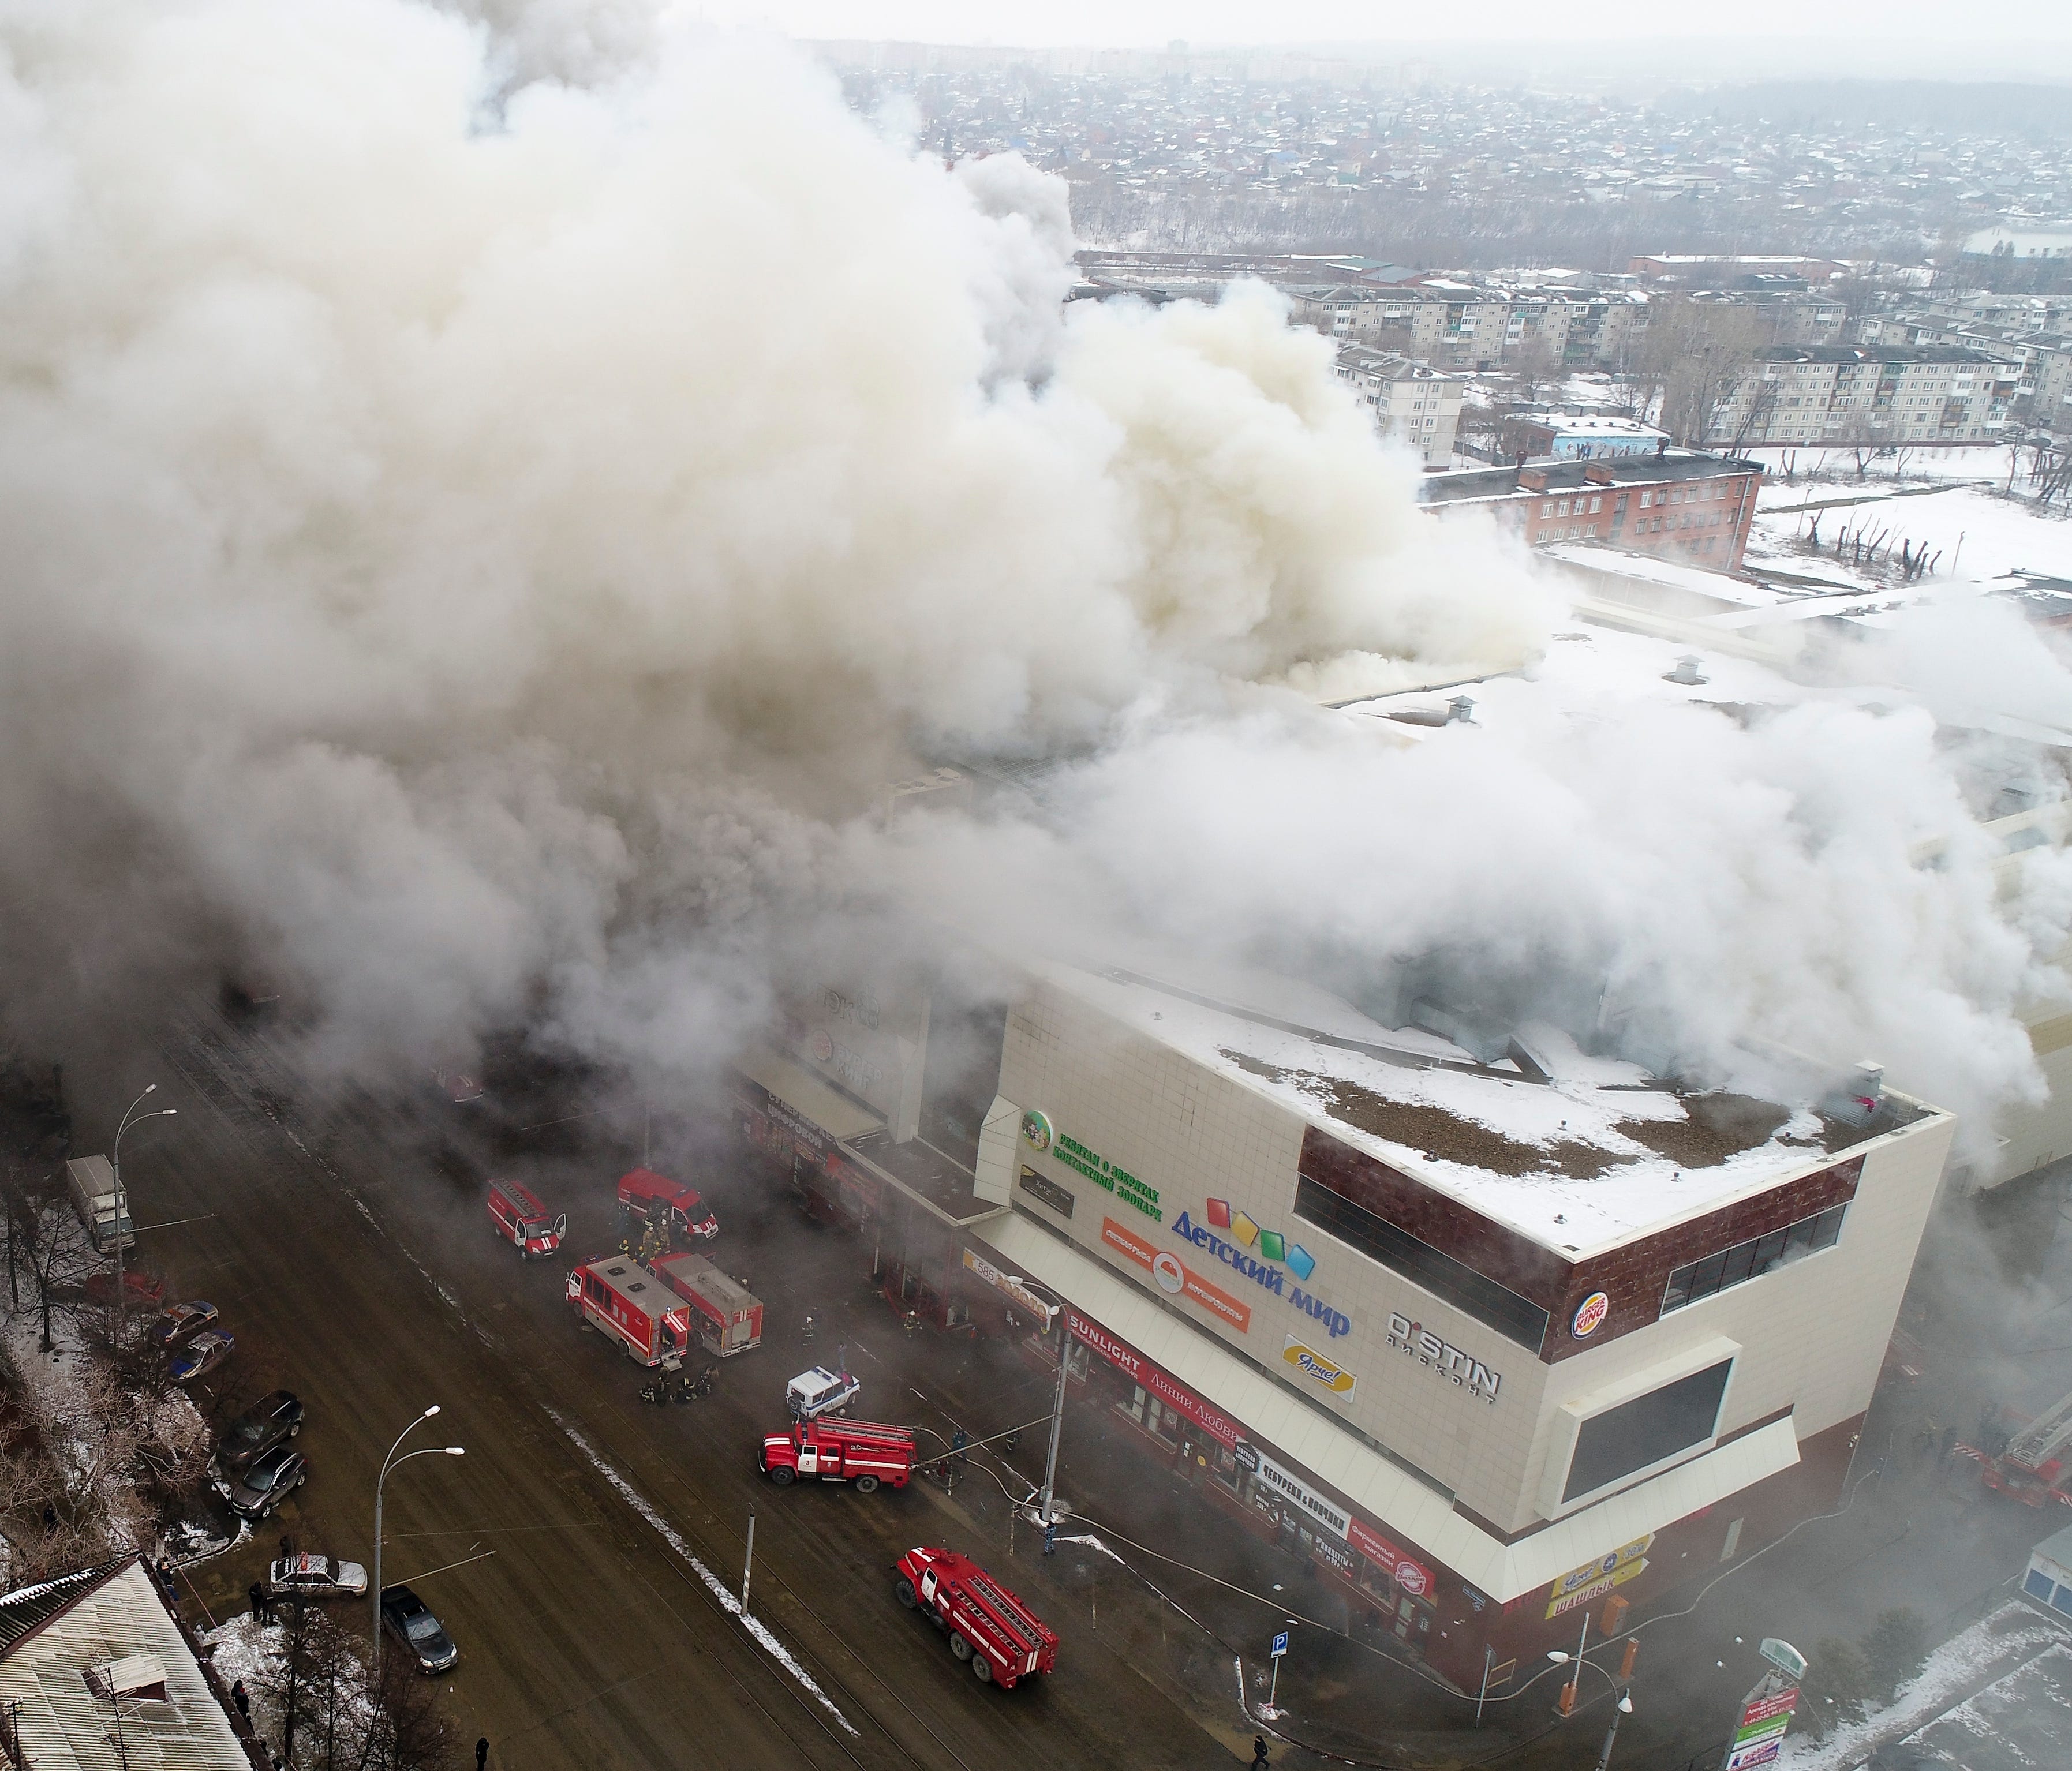 In this Russian Emergency Situations Ministry photo, on March 25, 2018, smoke rises above a multi-story shopping center in the Siberian city of Kemerovo, about 1,900 miles east of Moscow.